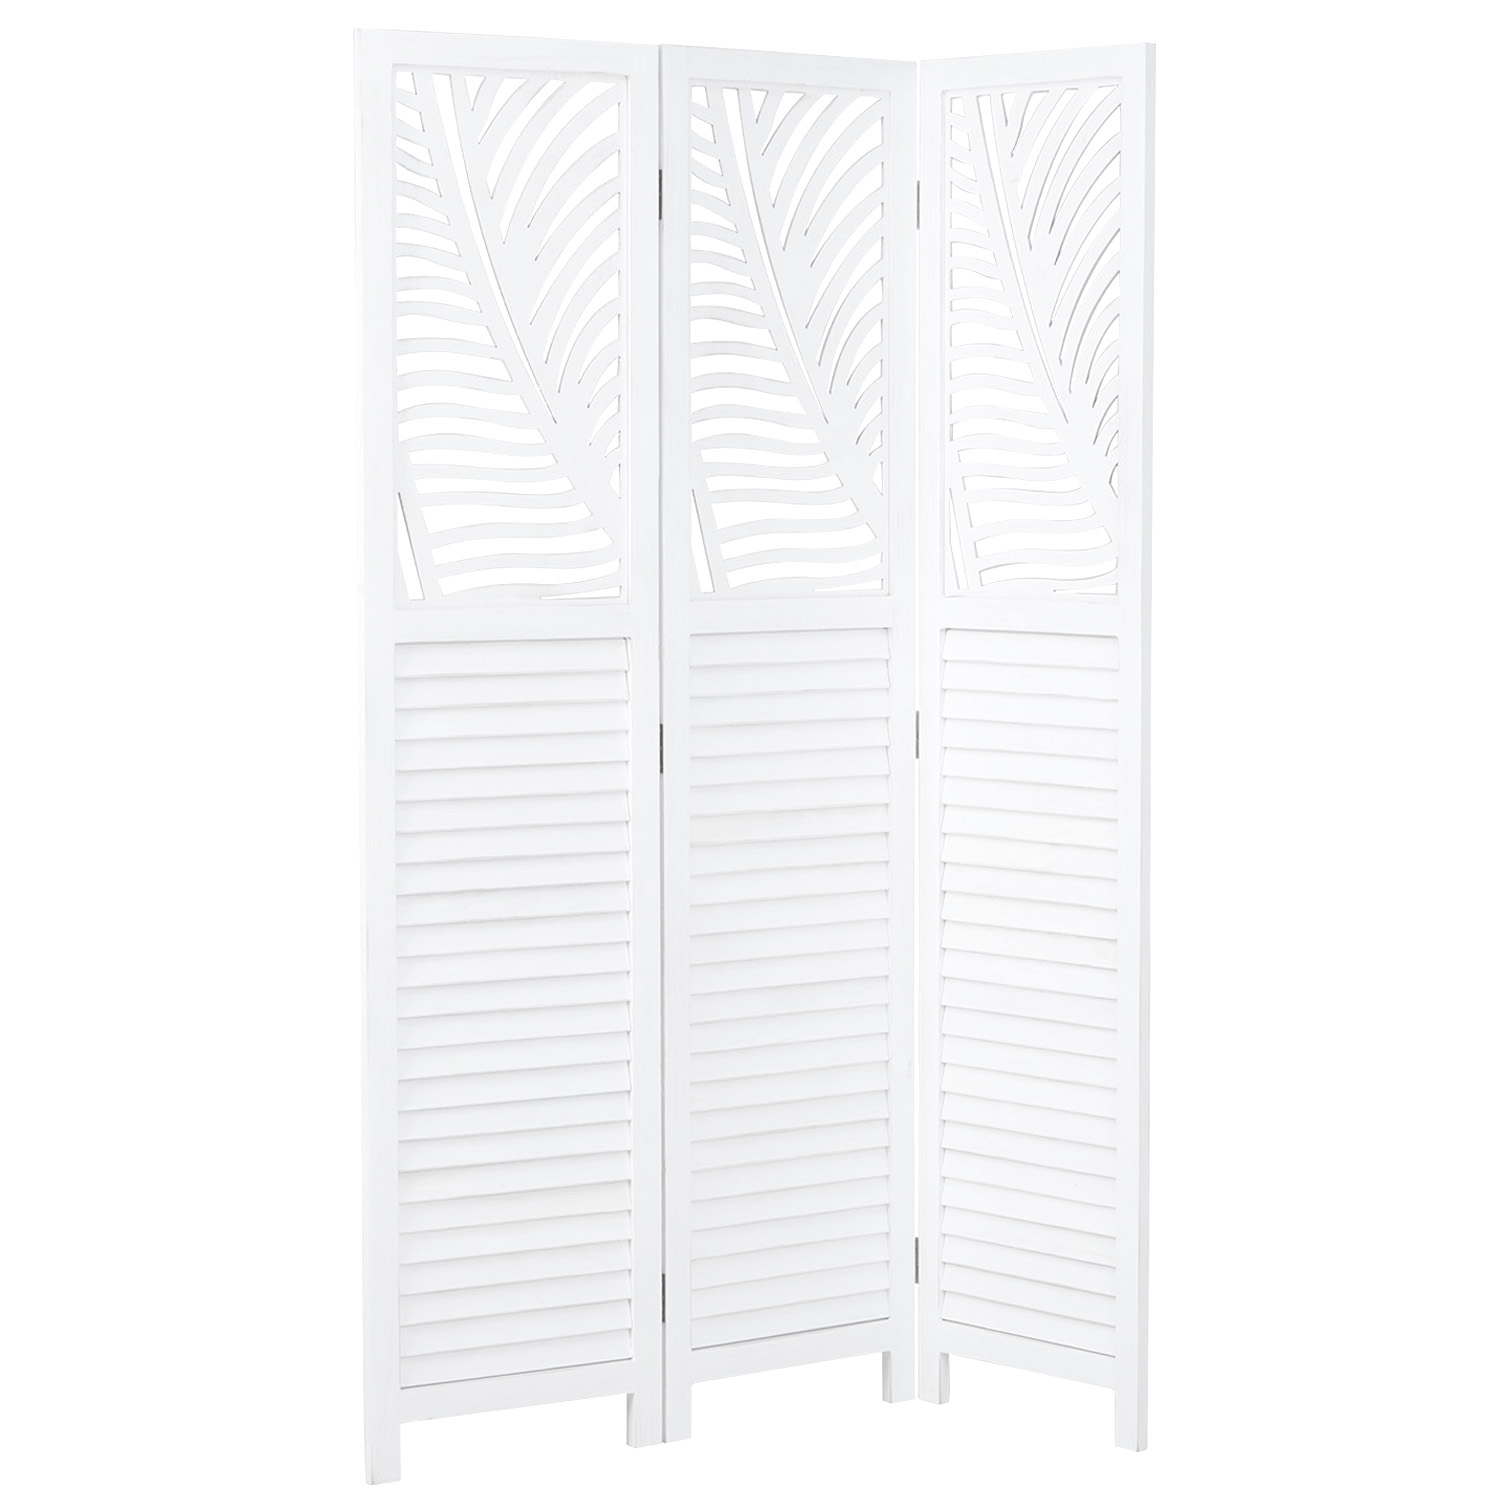 3 fold Wooden Paravent Room Divider Privacy Screen Partition Folding Vintage Look White